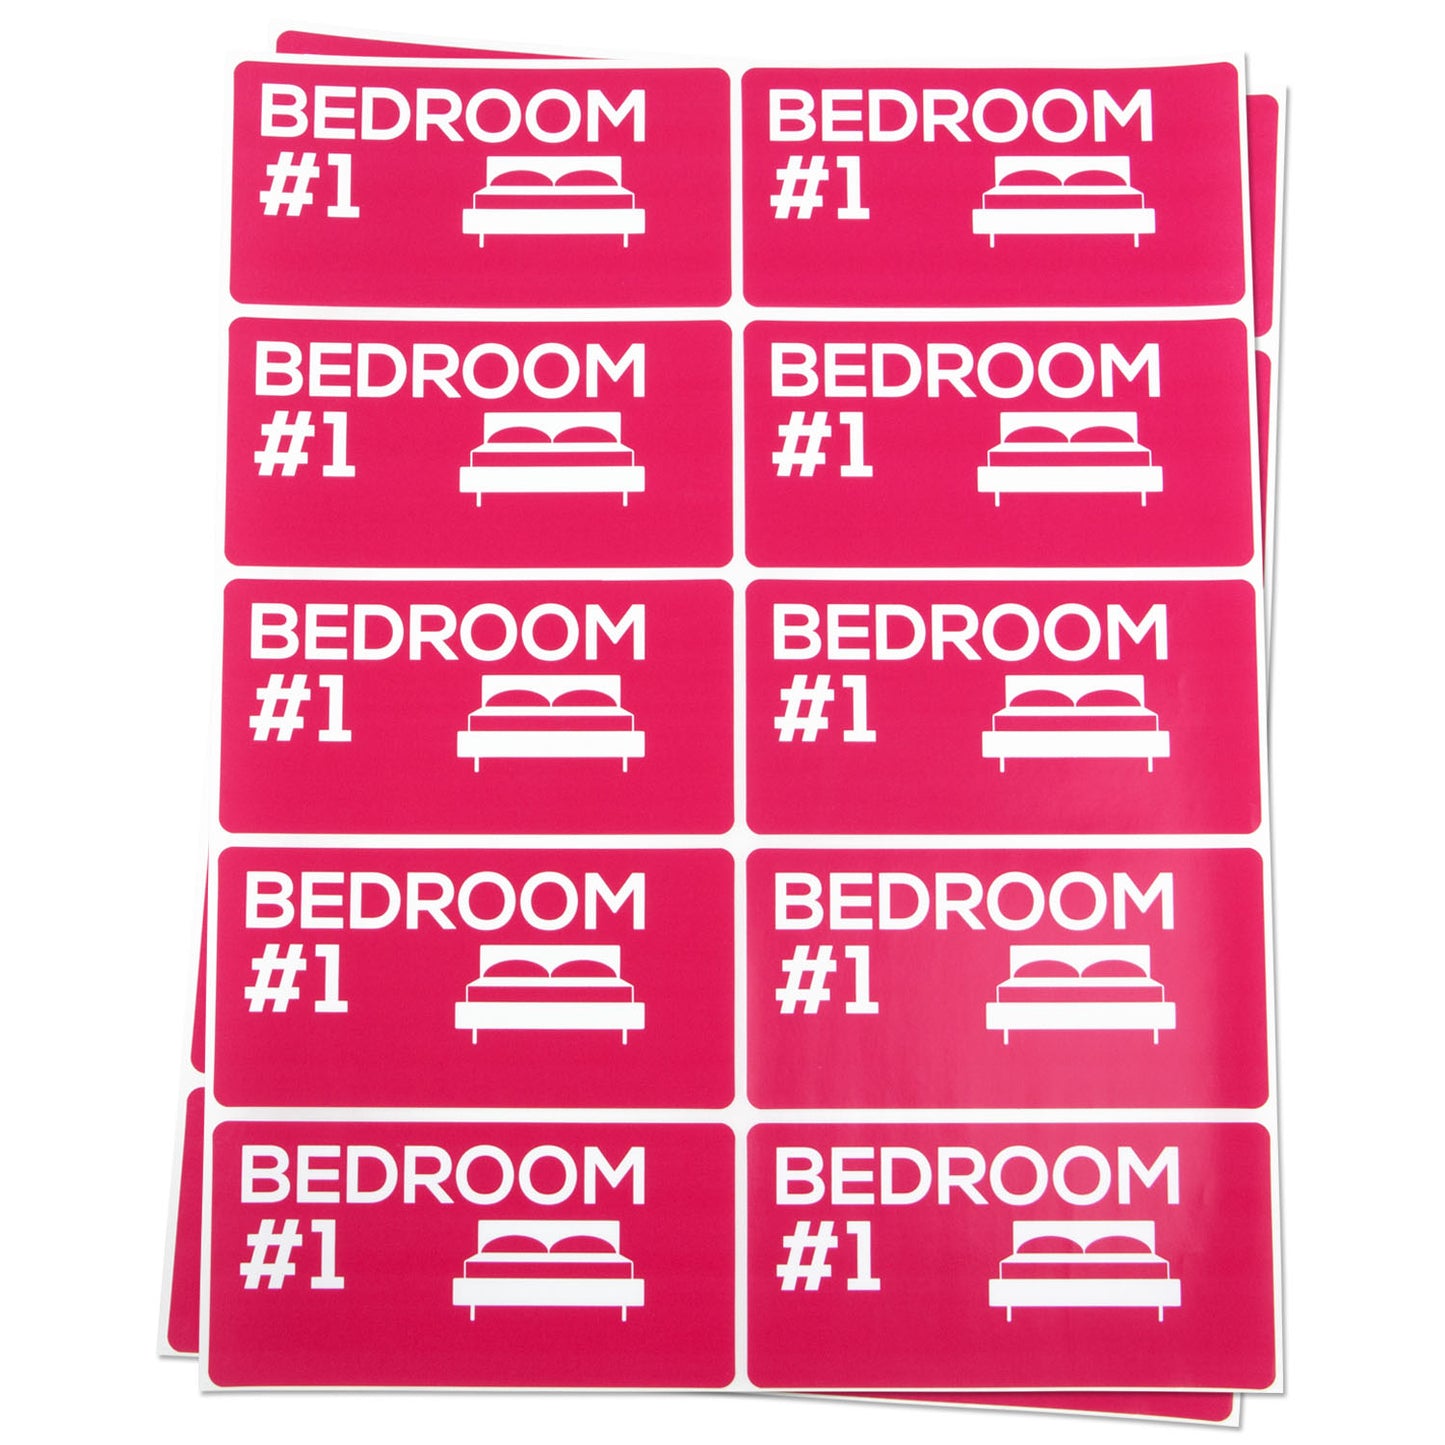 4 x 2 inch | Moving & Packing: Bedroom #1 Stickers